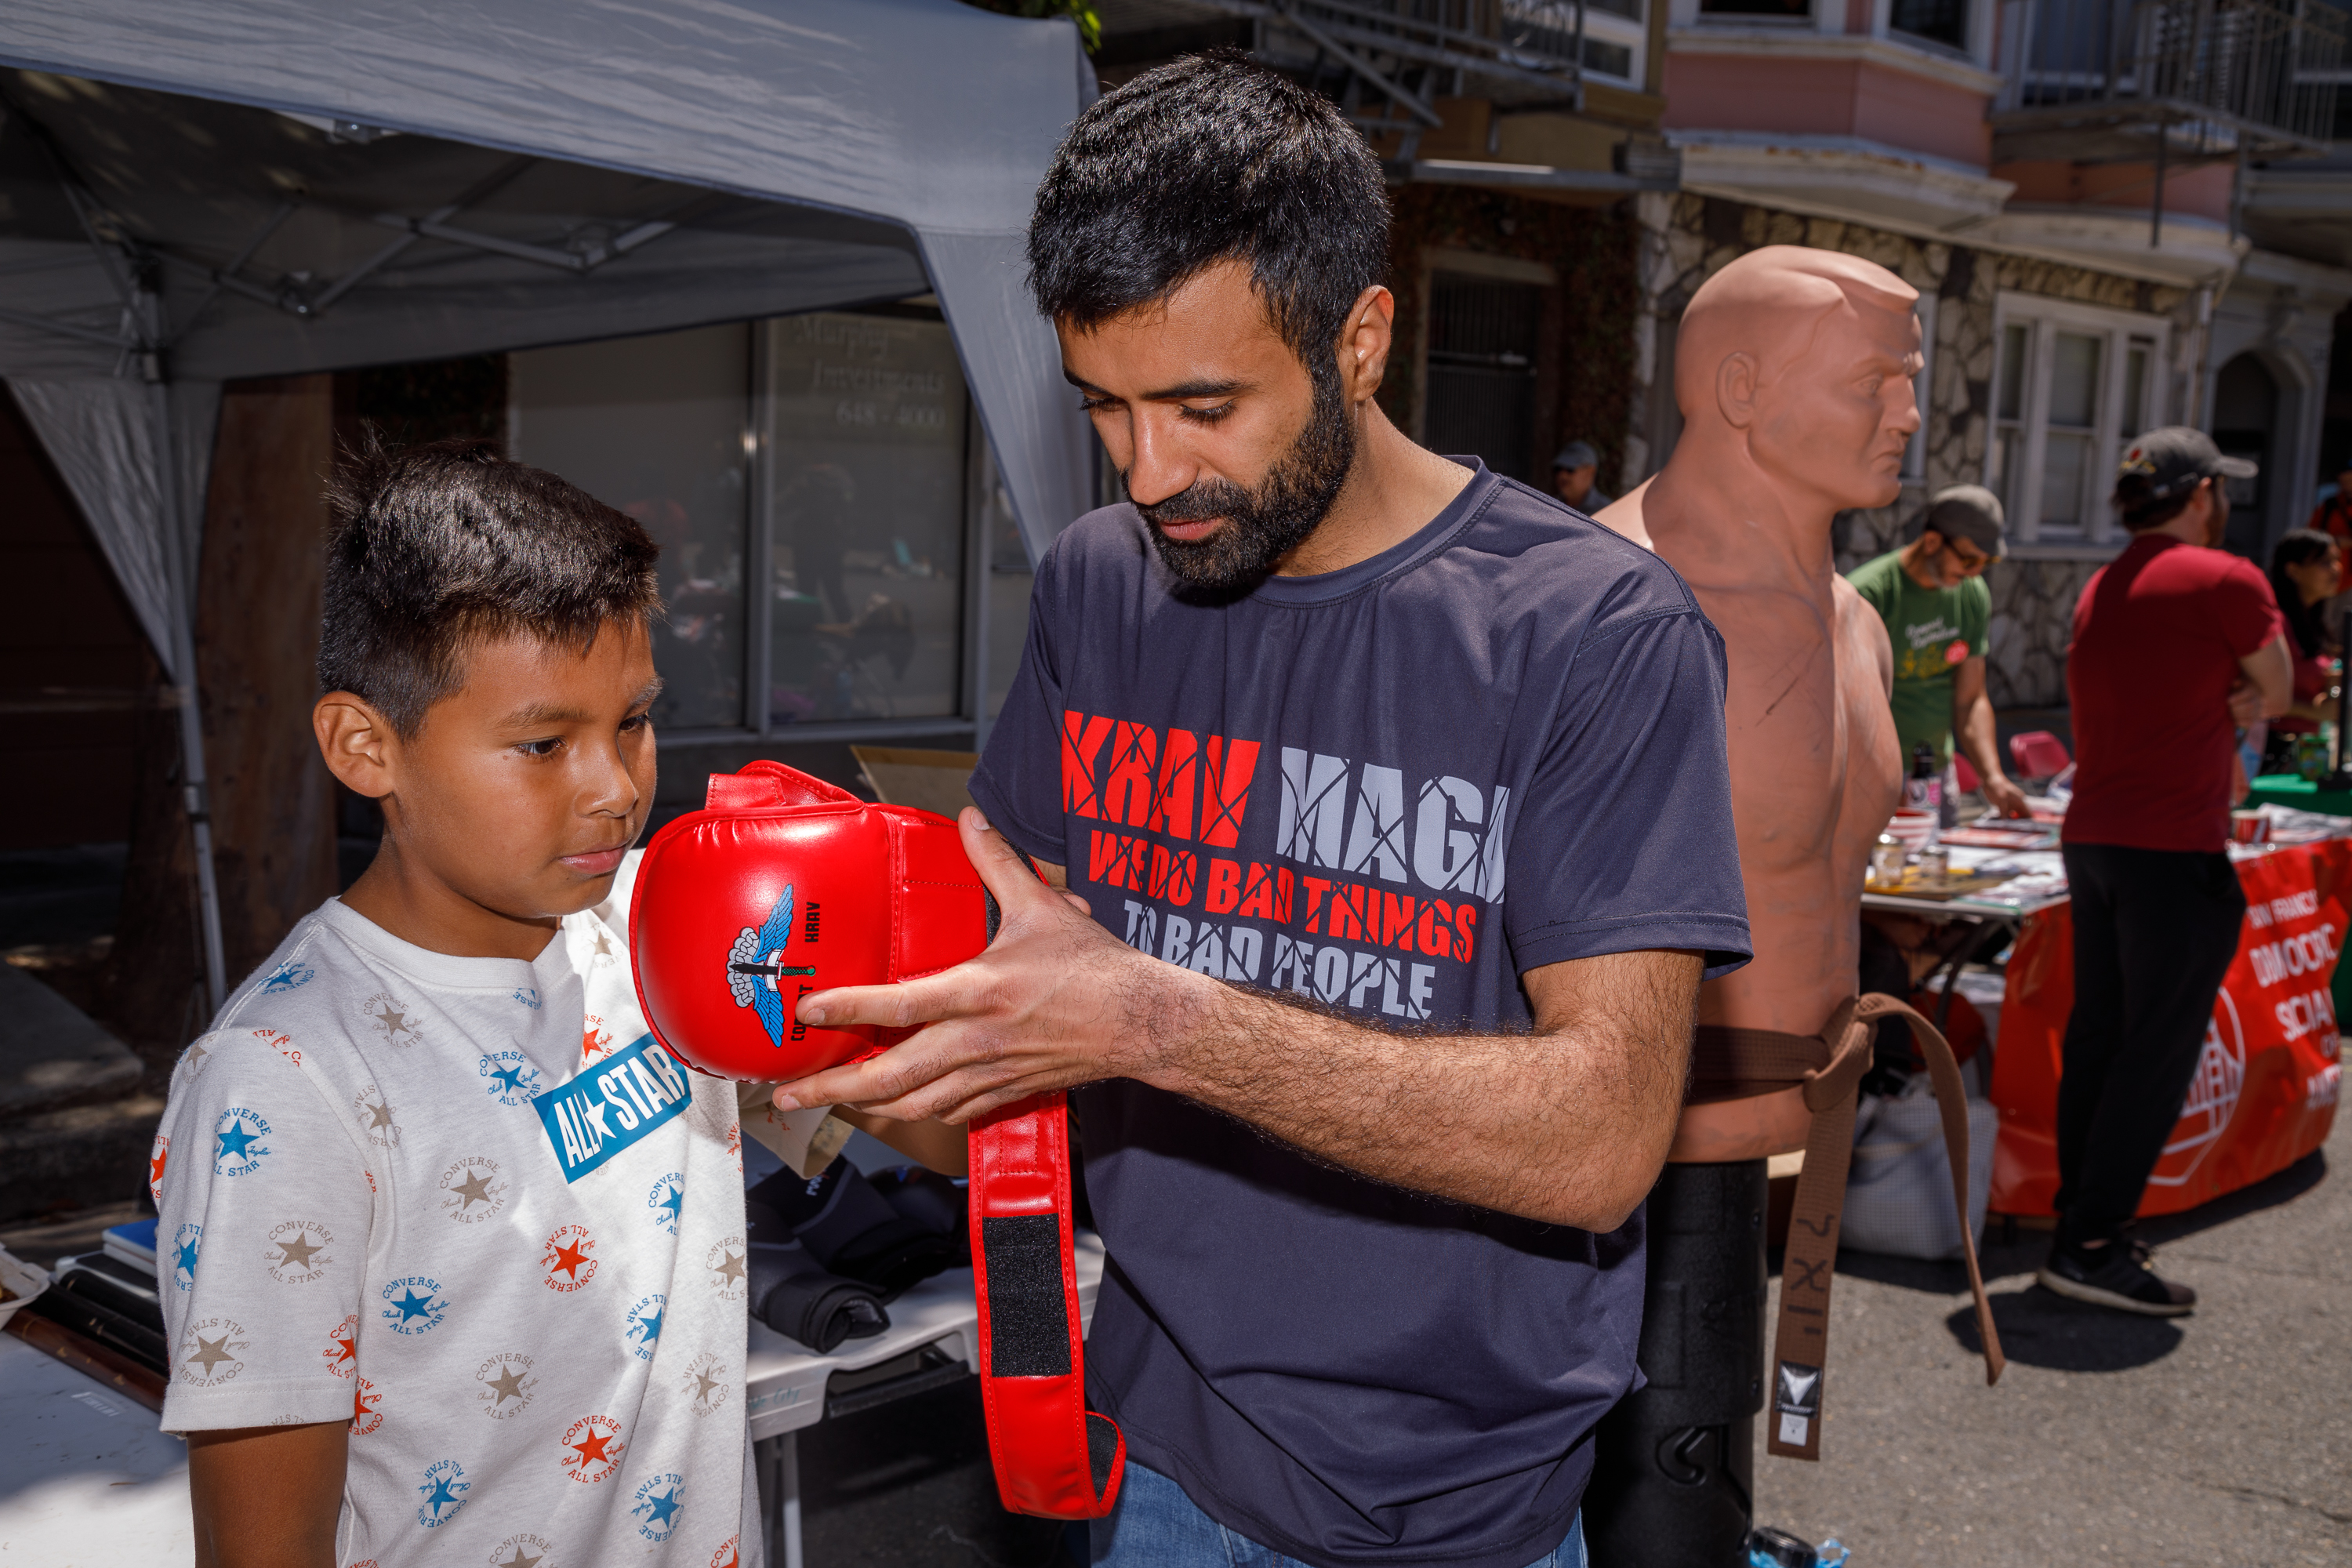 A man is showing a red boxing glove to a young boy at an outdoor stall with various items on display.